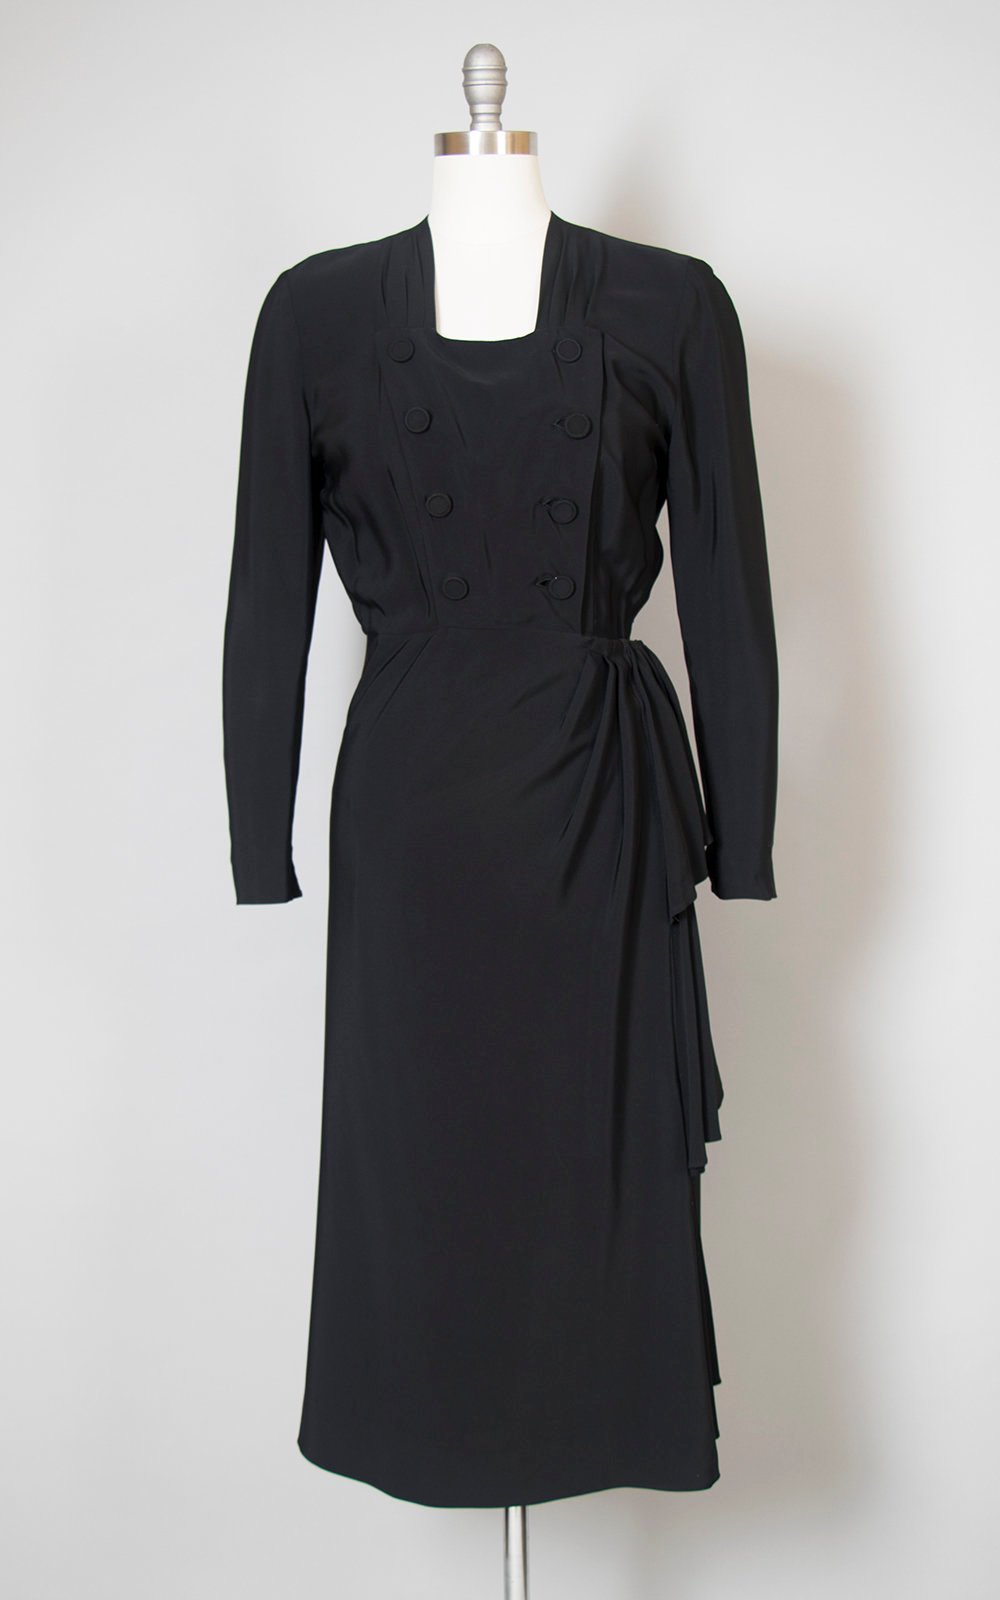 $65 DRESS SALE /// 1940s Black Rayon Double Breasted Draped Evening Dr ...